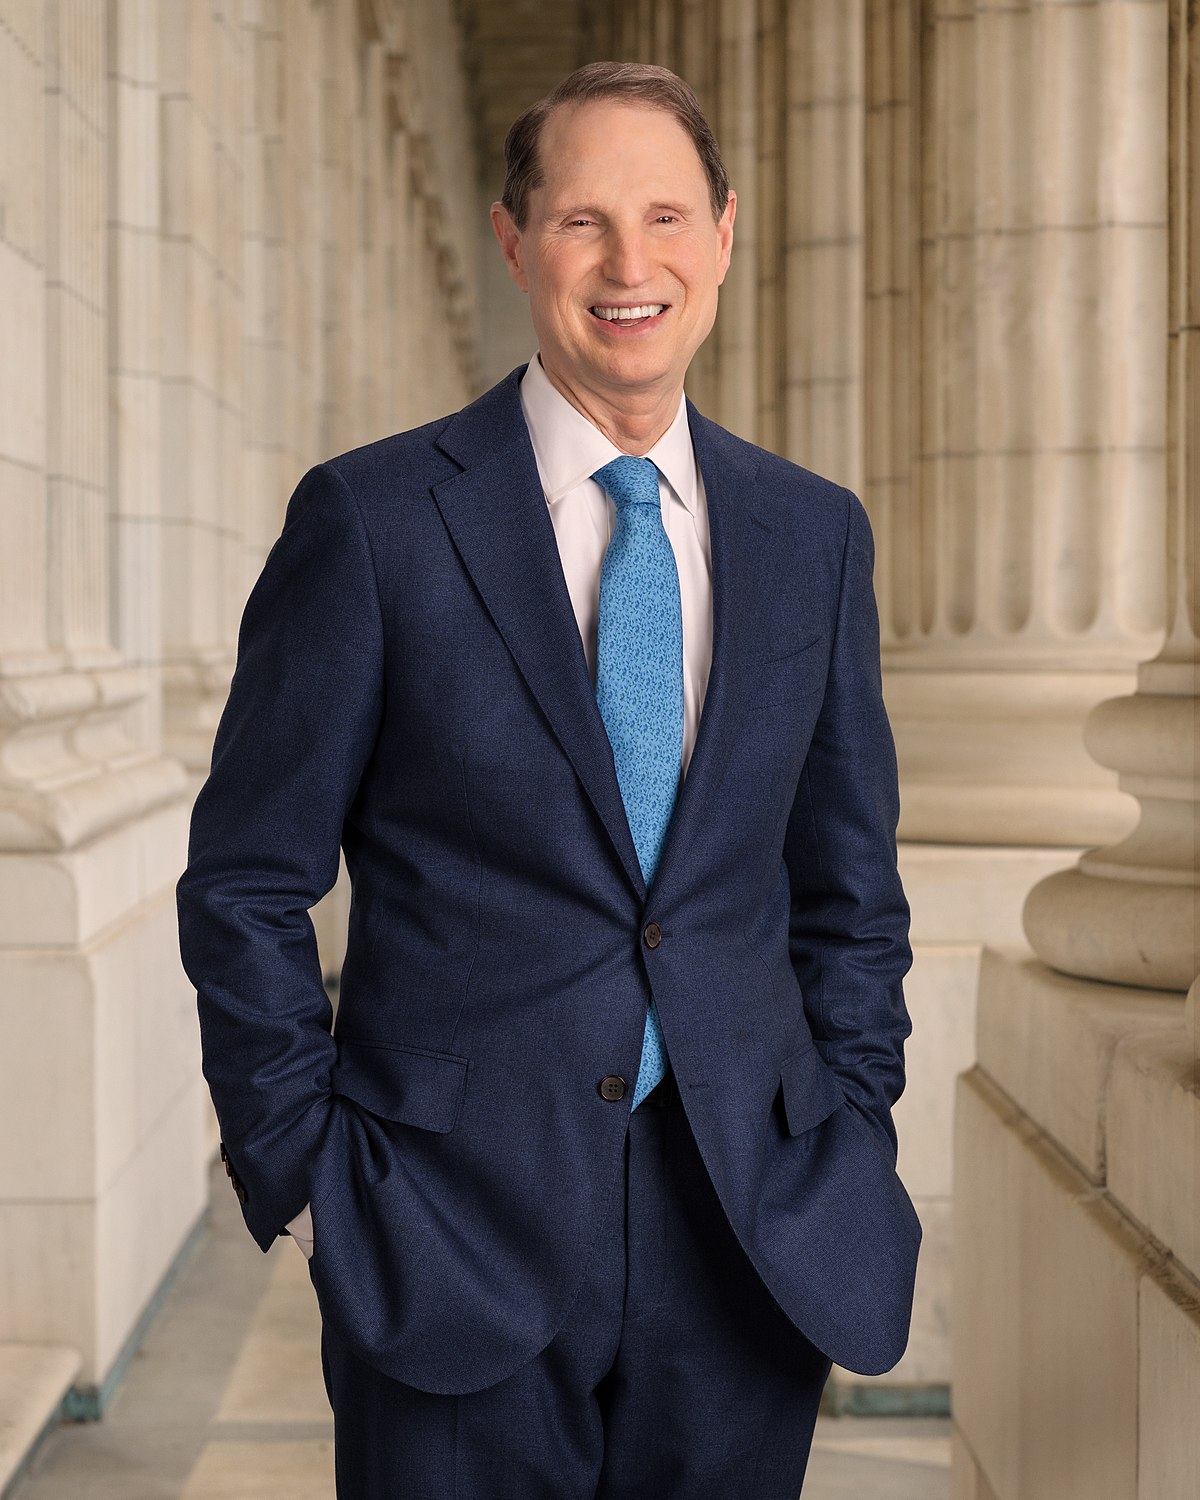 NABPAC co-hosted Sen. Ron Wyden (OR) during the virtual State Leadership Conference, raising $26,450.